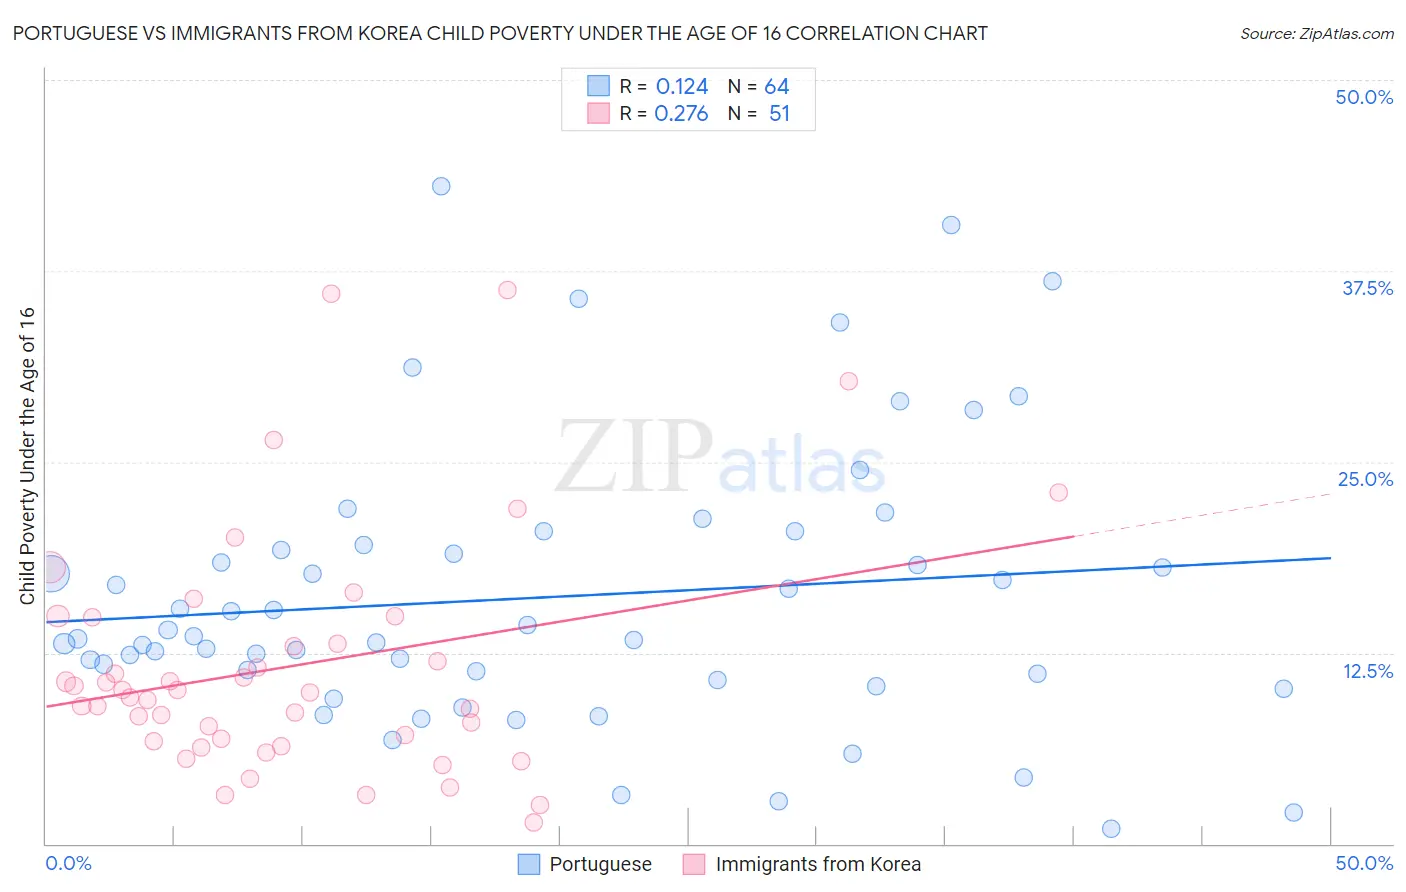 Portuguese vs Immigrants from Korea Child Poverty Under the Age of 16